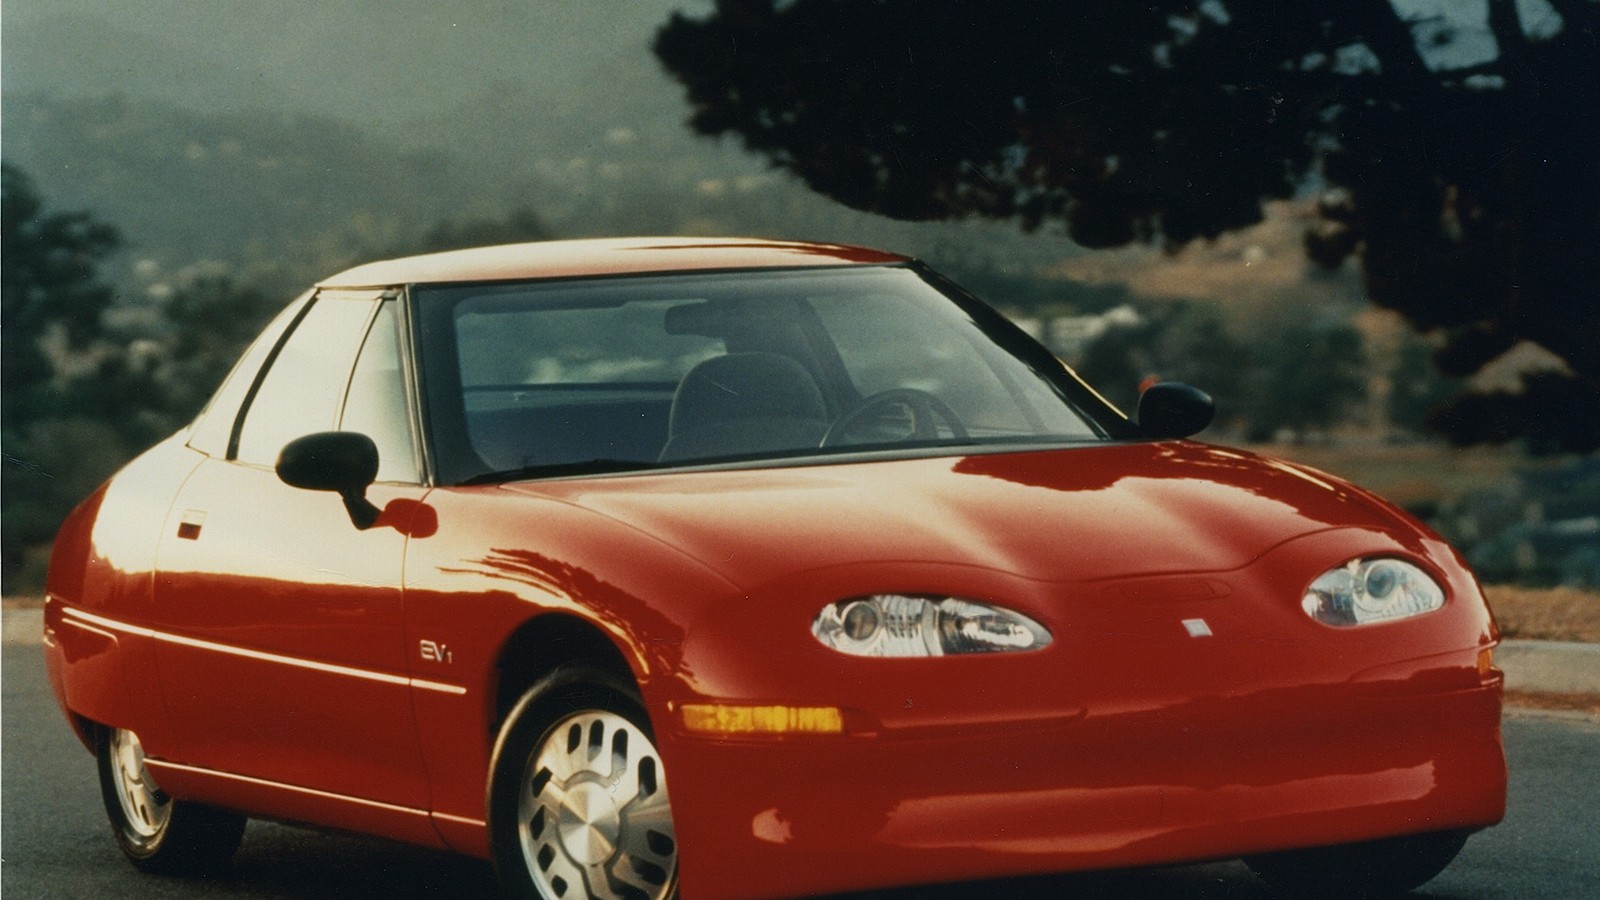 GM could have led the electric revolution with the EV1